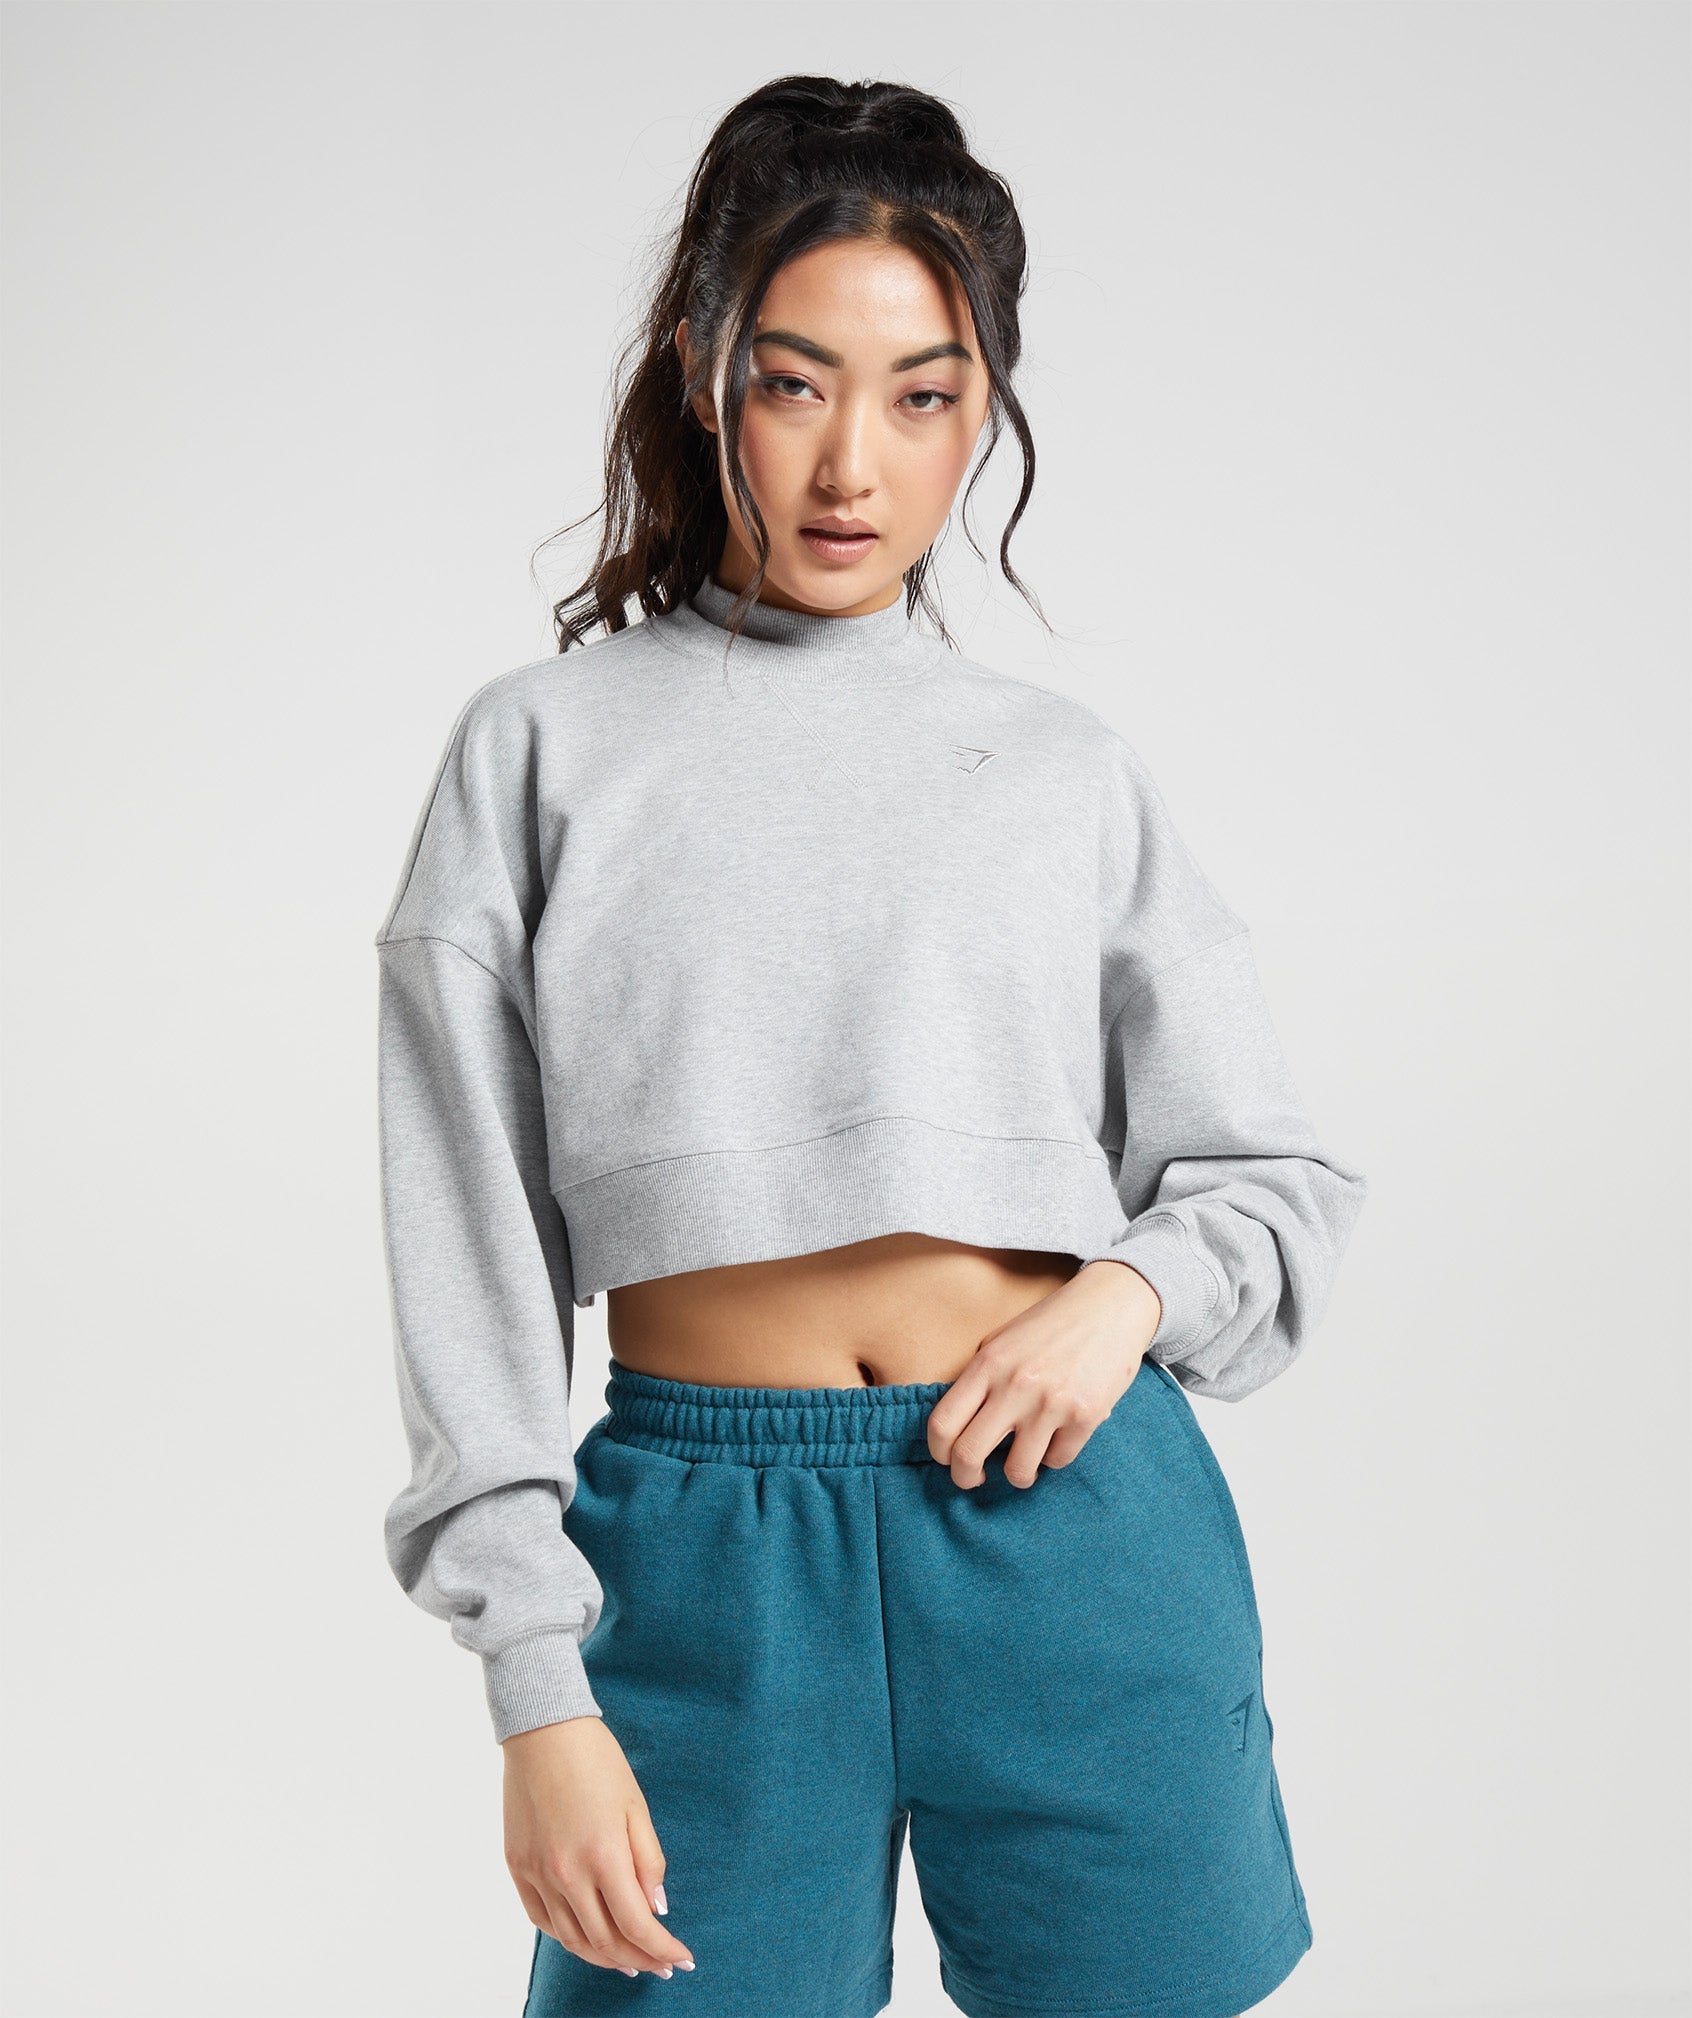 Rest Day Sweats Cropped Pullover in Light Grey Core Marl - view 1